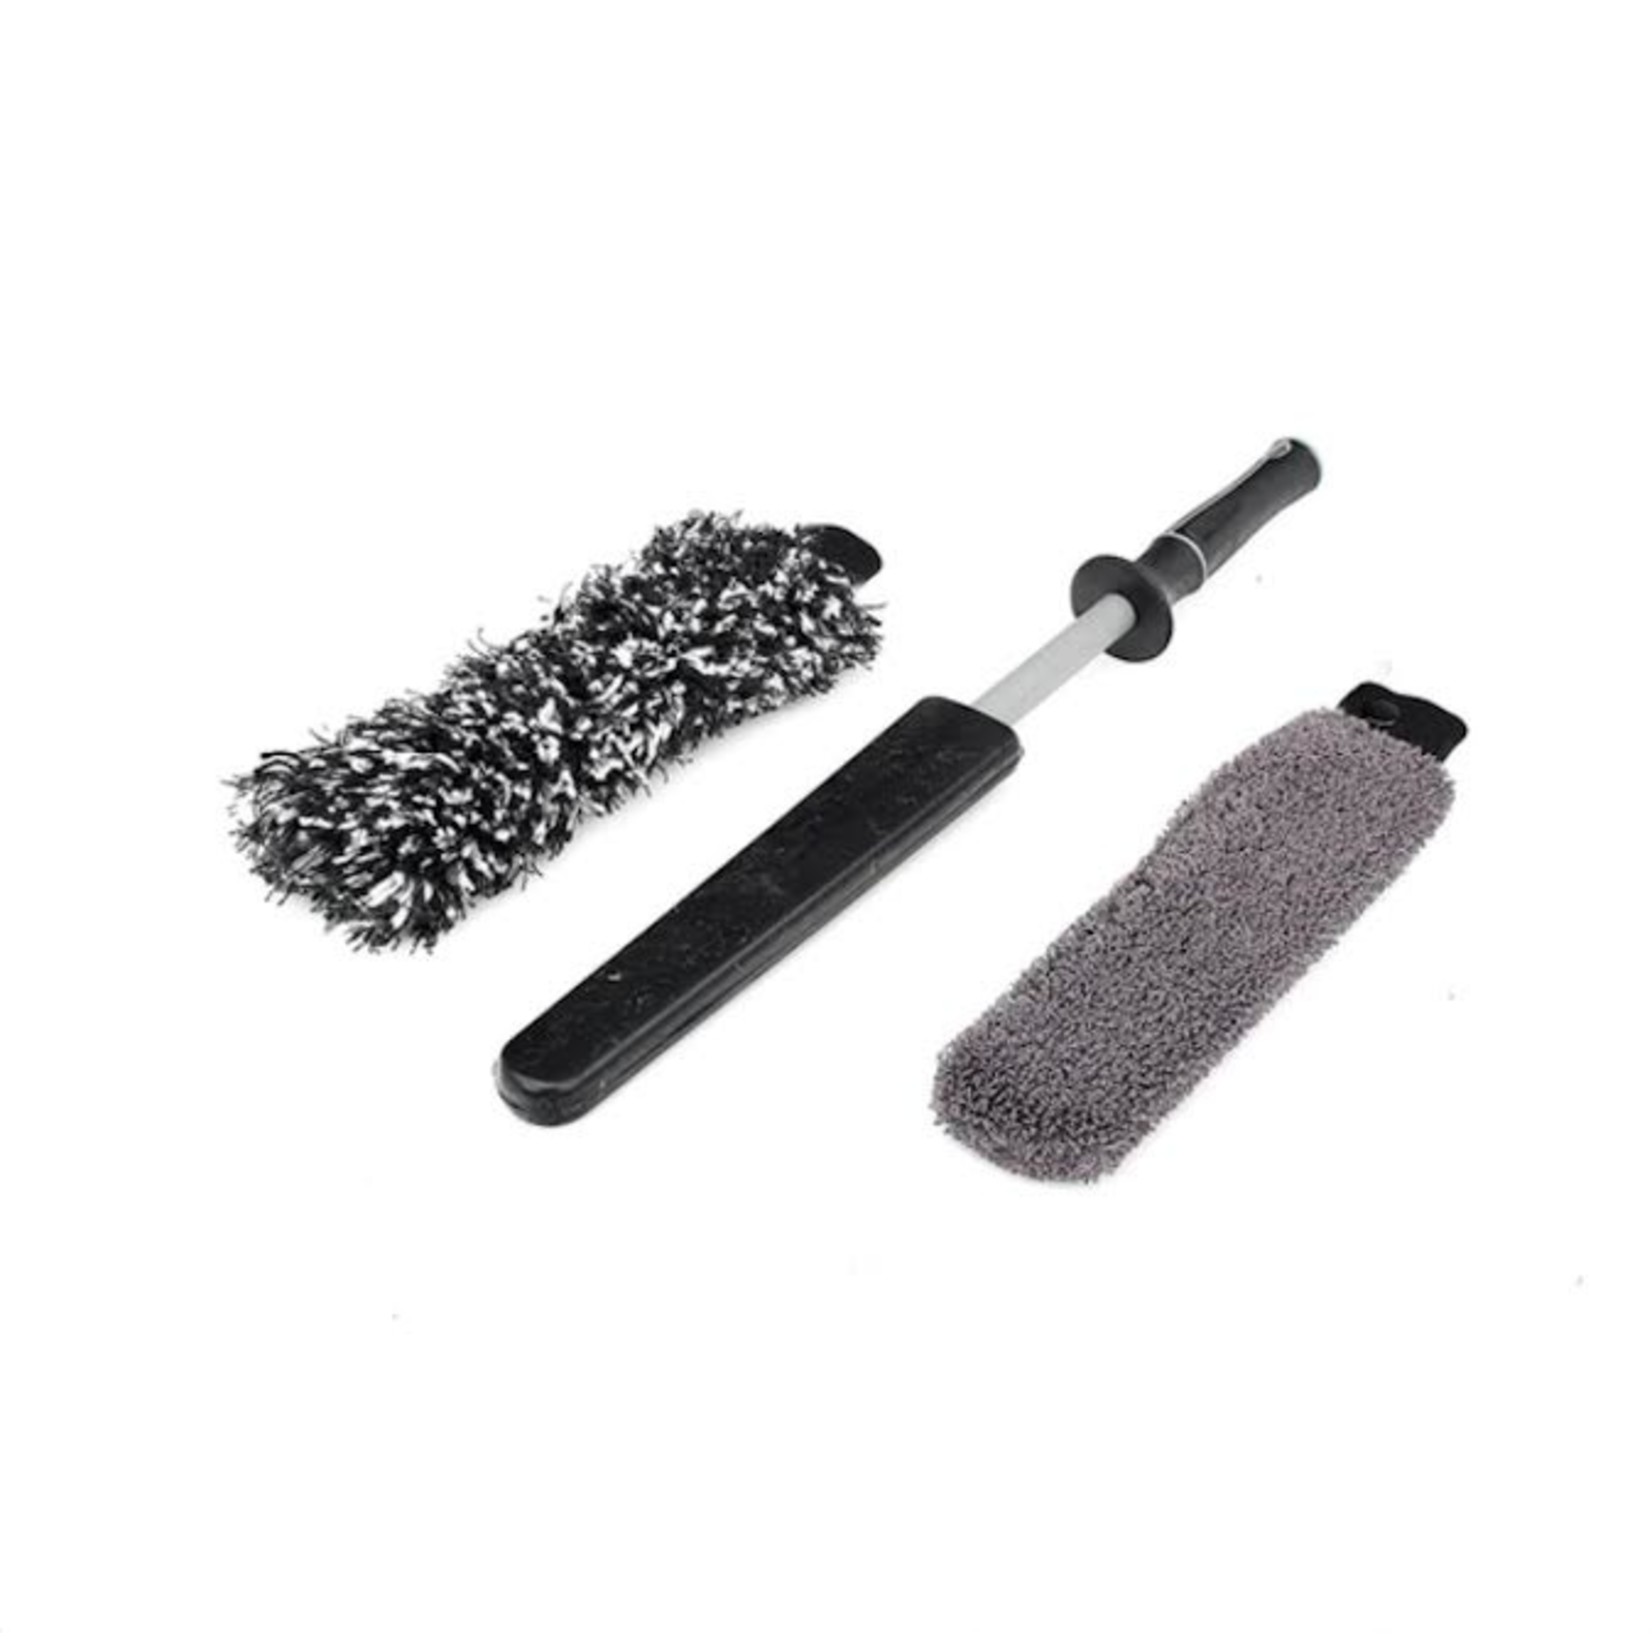 Wheel Brush Kit with Interchangeable Covers – Detail Factory